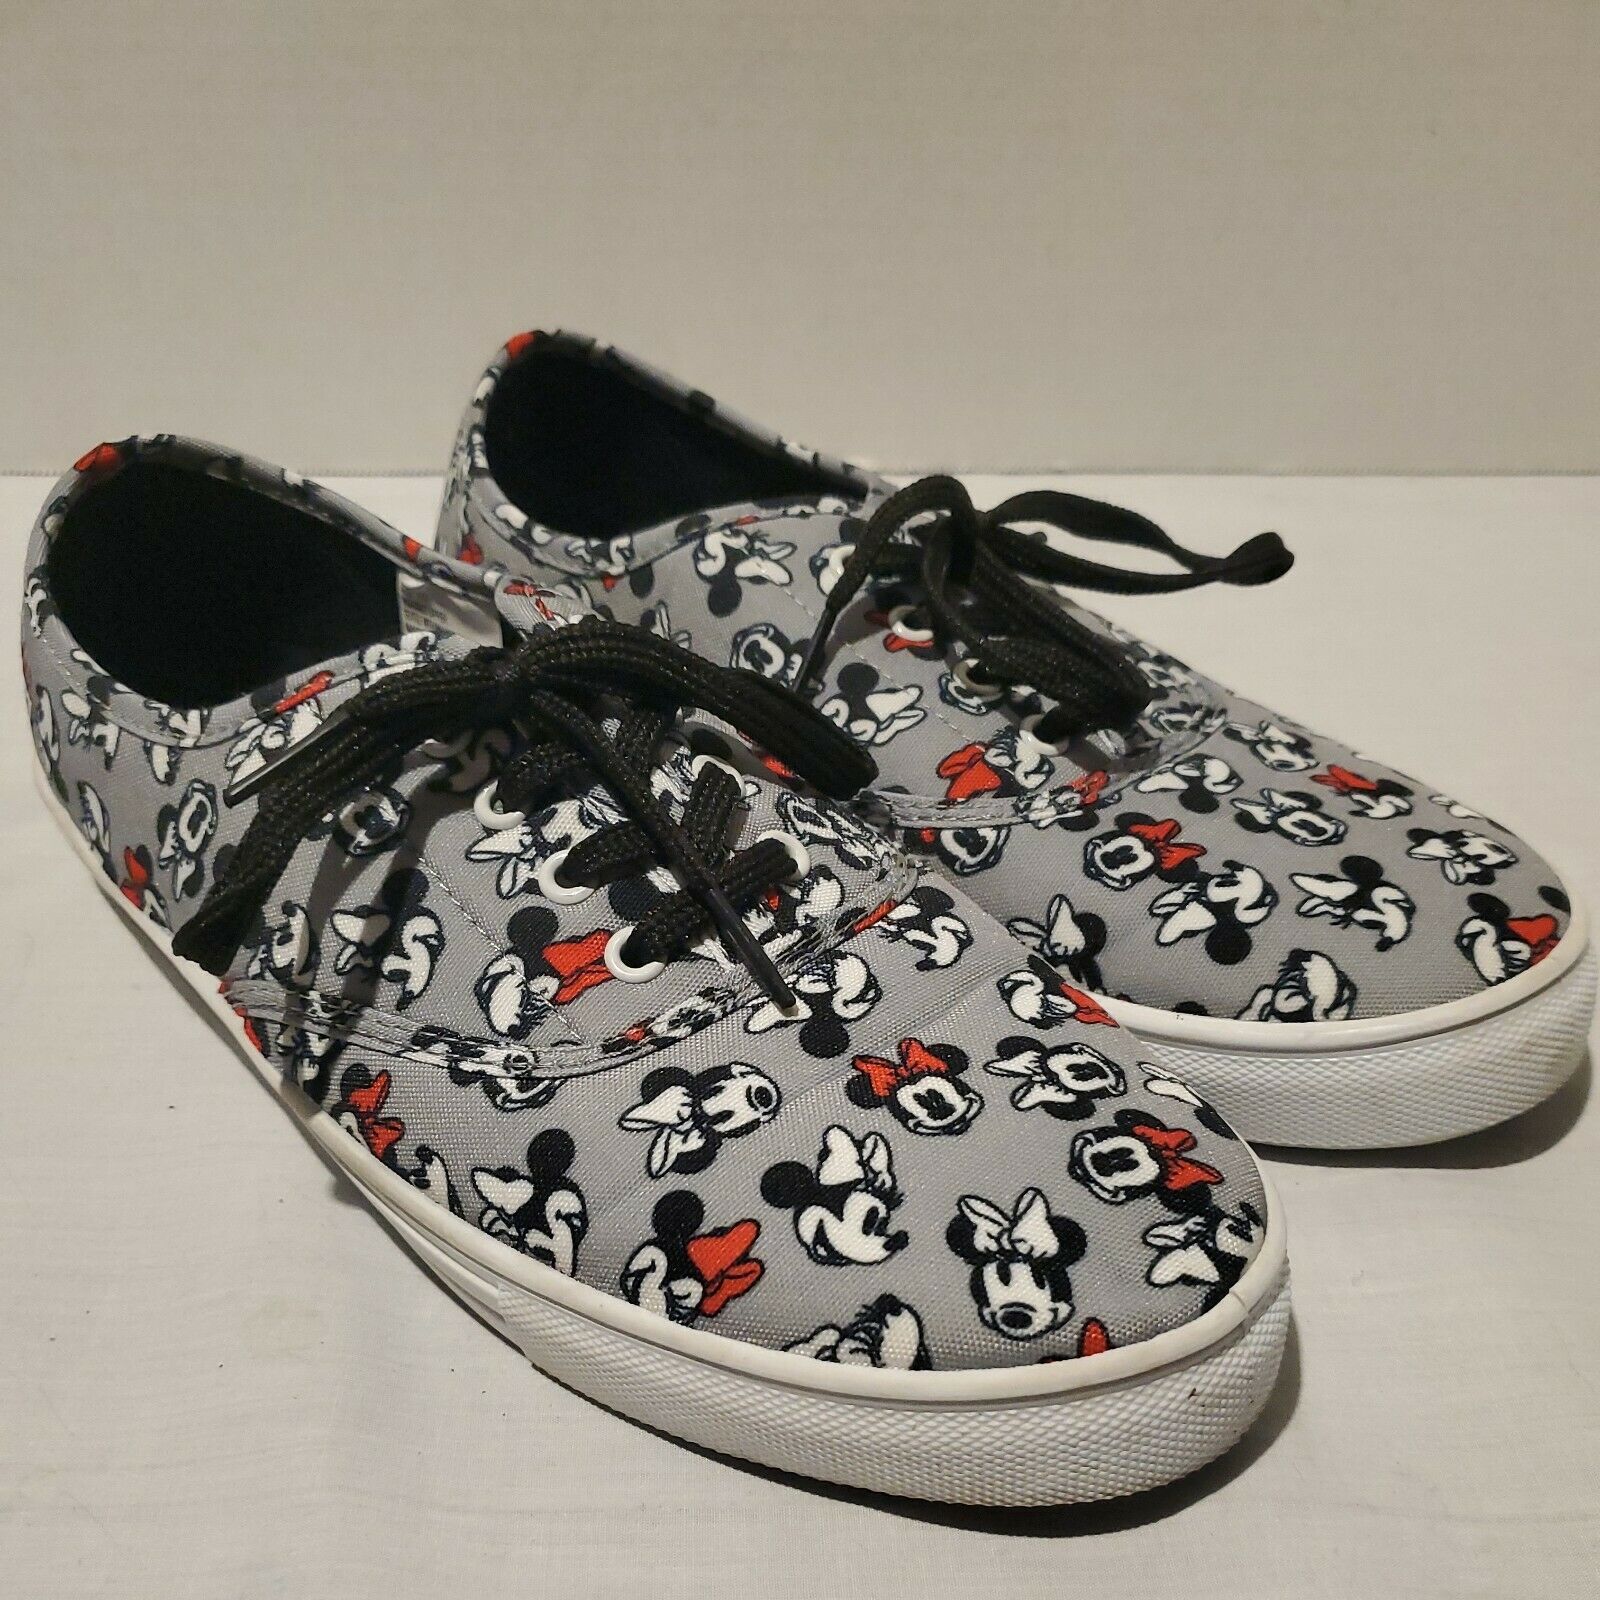 Minnie Mouse Disney Womens Size 10 Walking Flats Shoes Casual Gray VG+ Condition